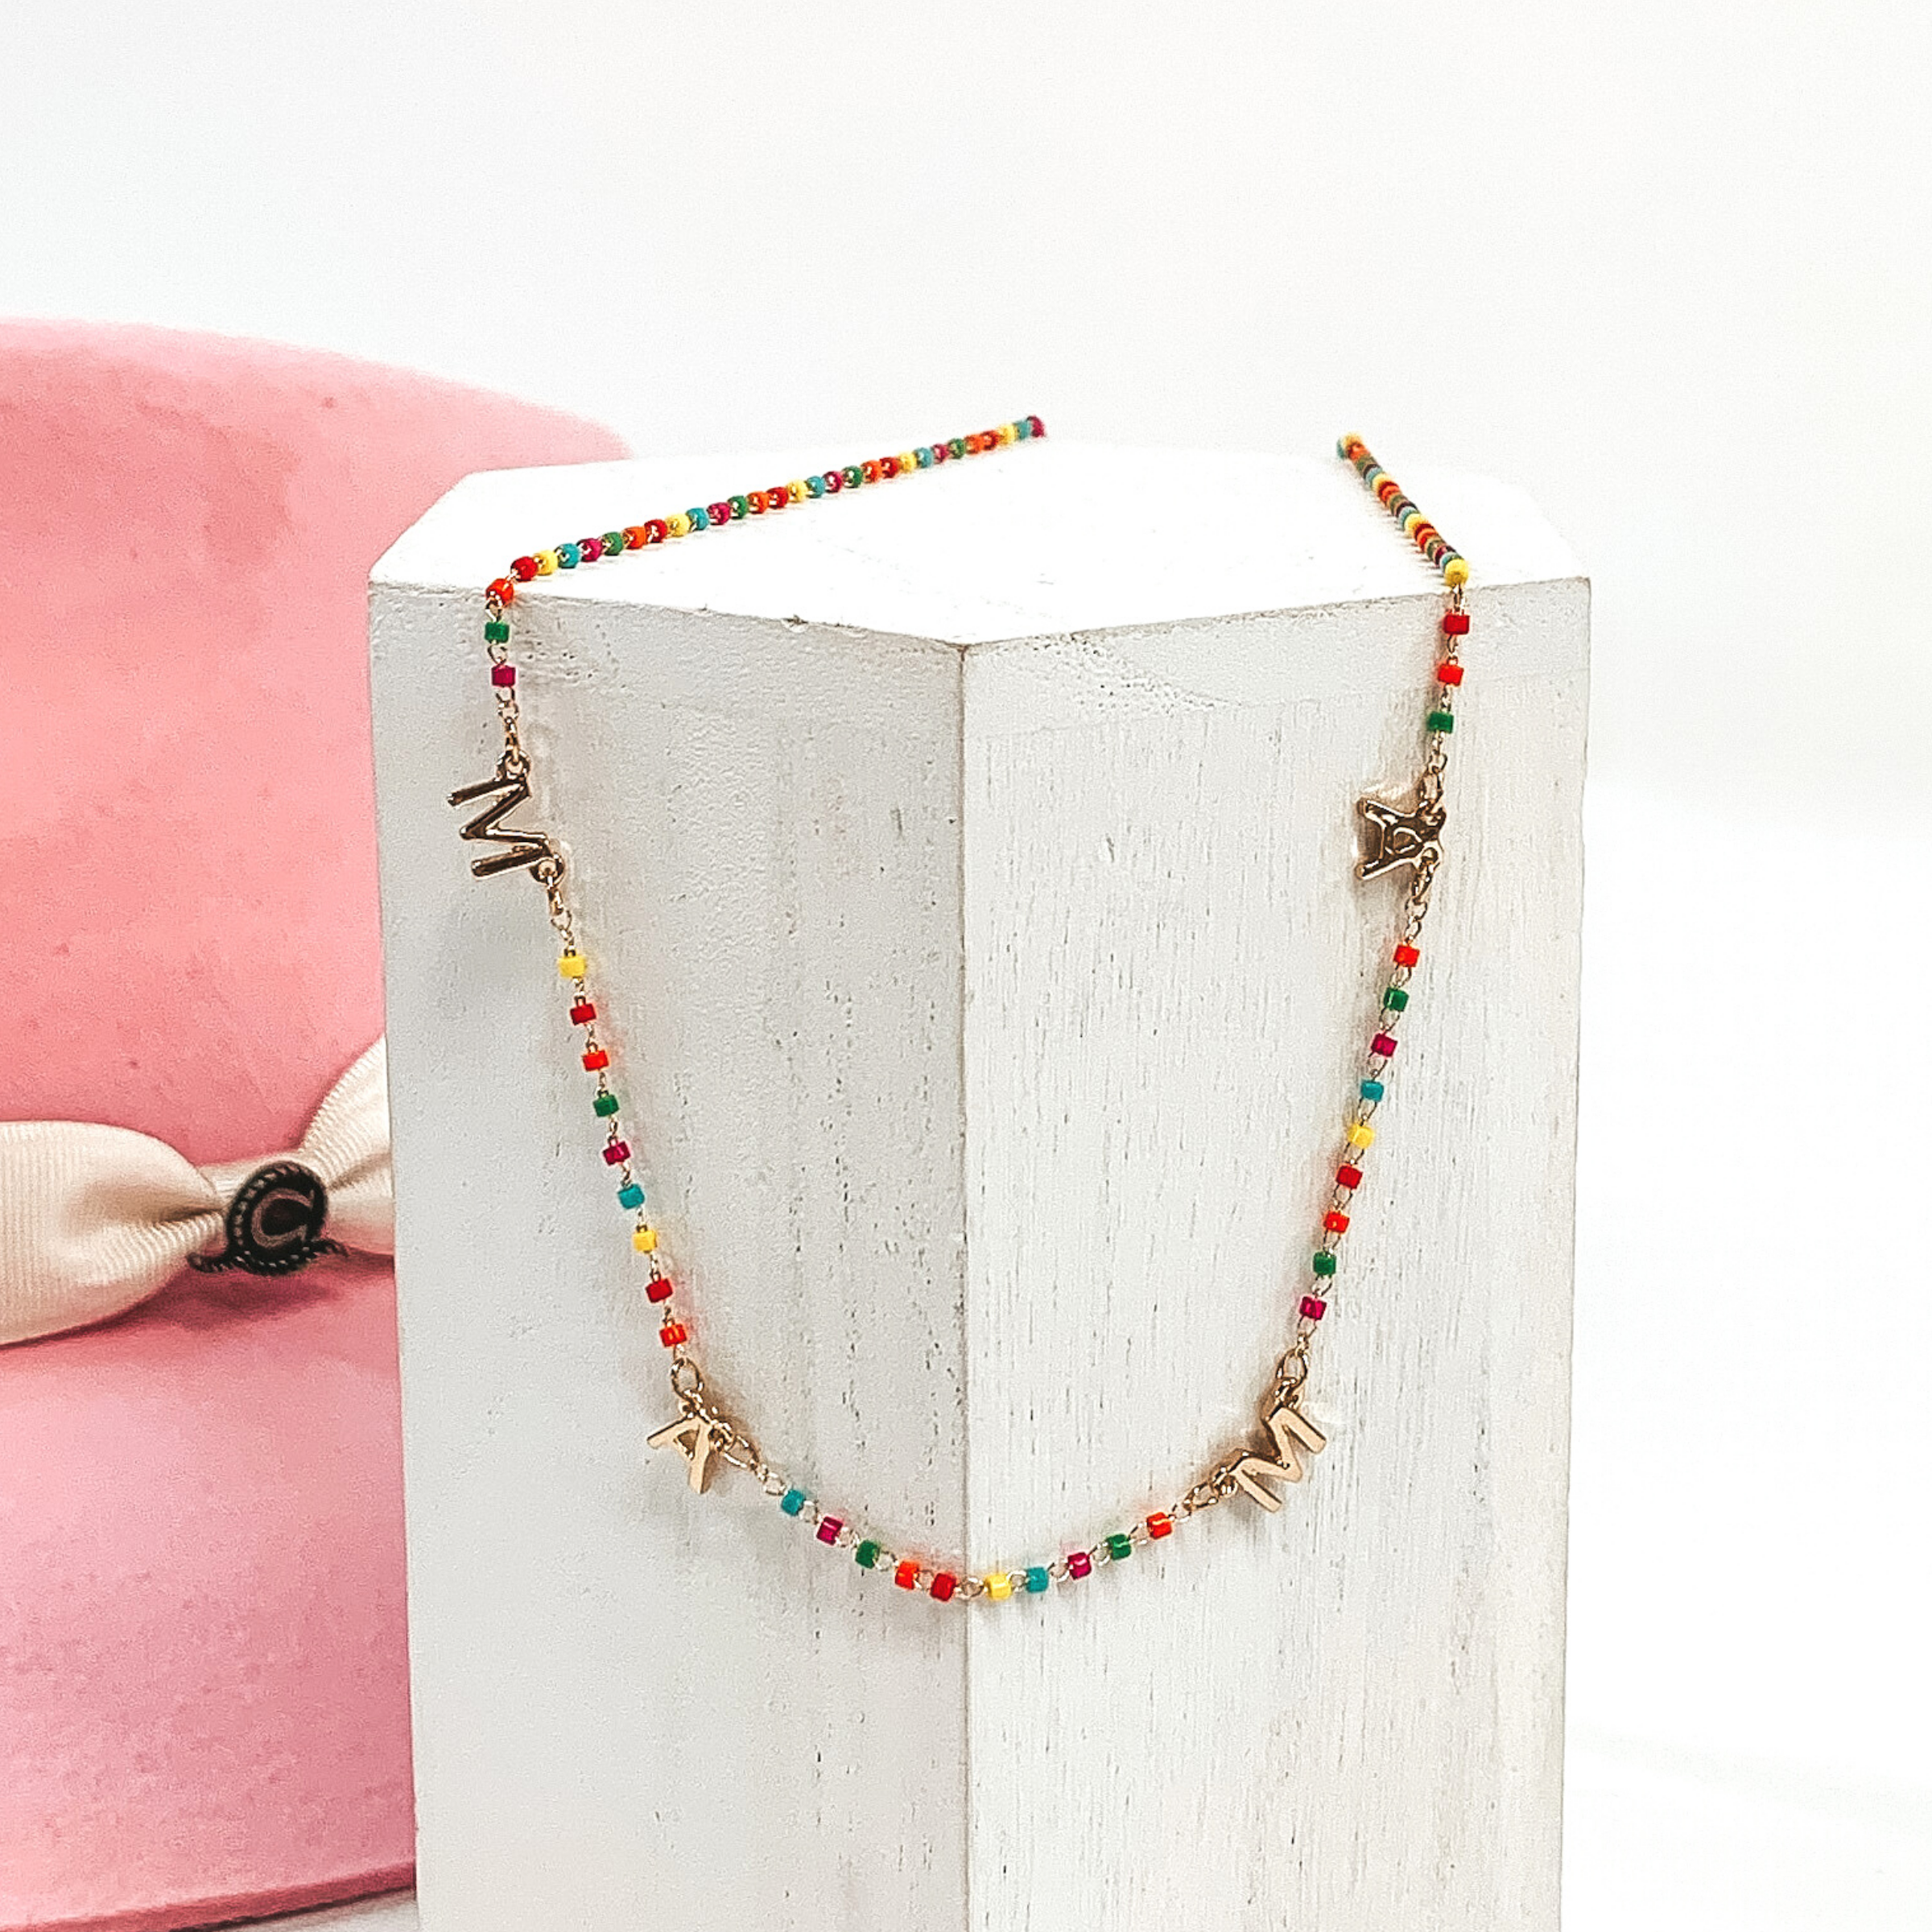 This is a multicolored beaded necklace with gold letter charms that spell out "MAMA." This necklace is pictured on a white block on a white background with a pink hat in the background.